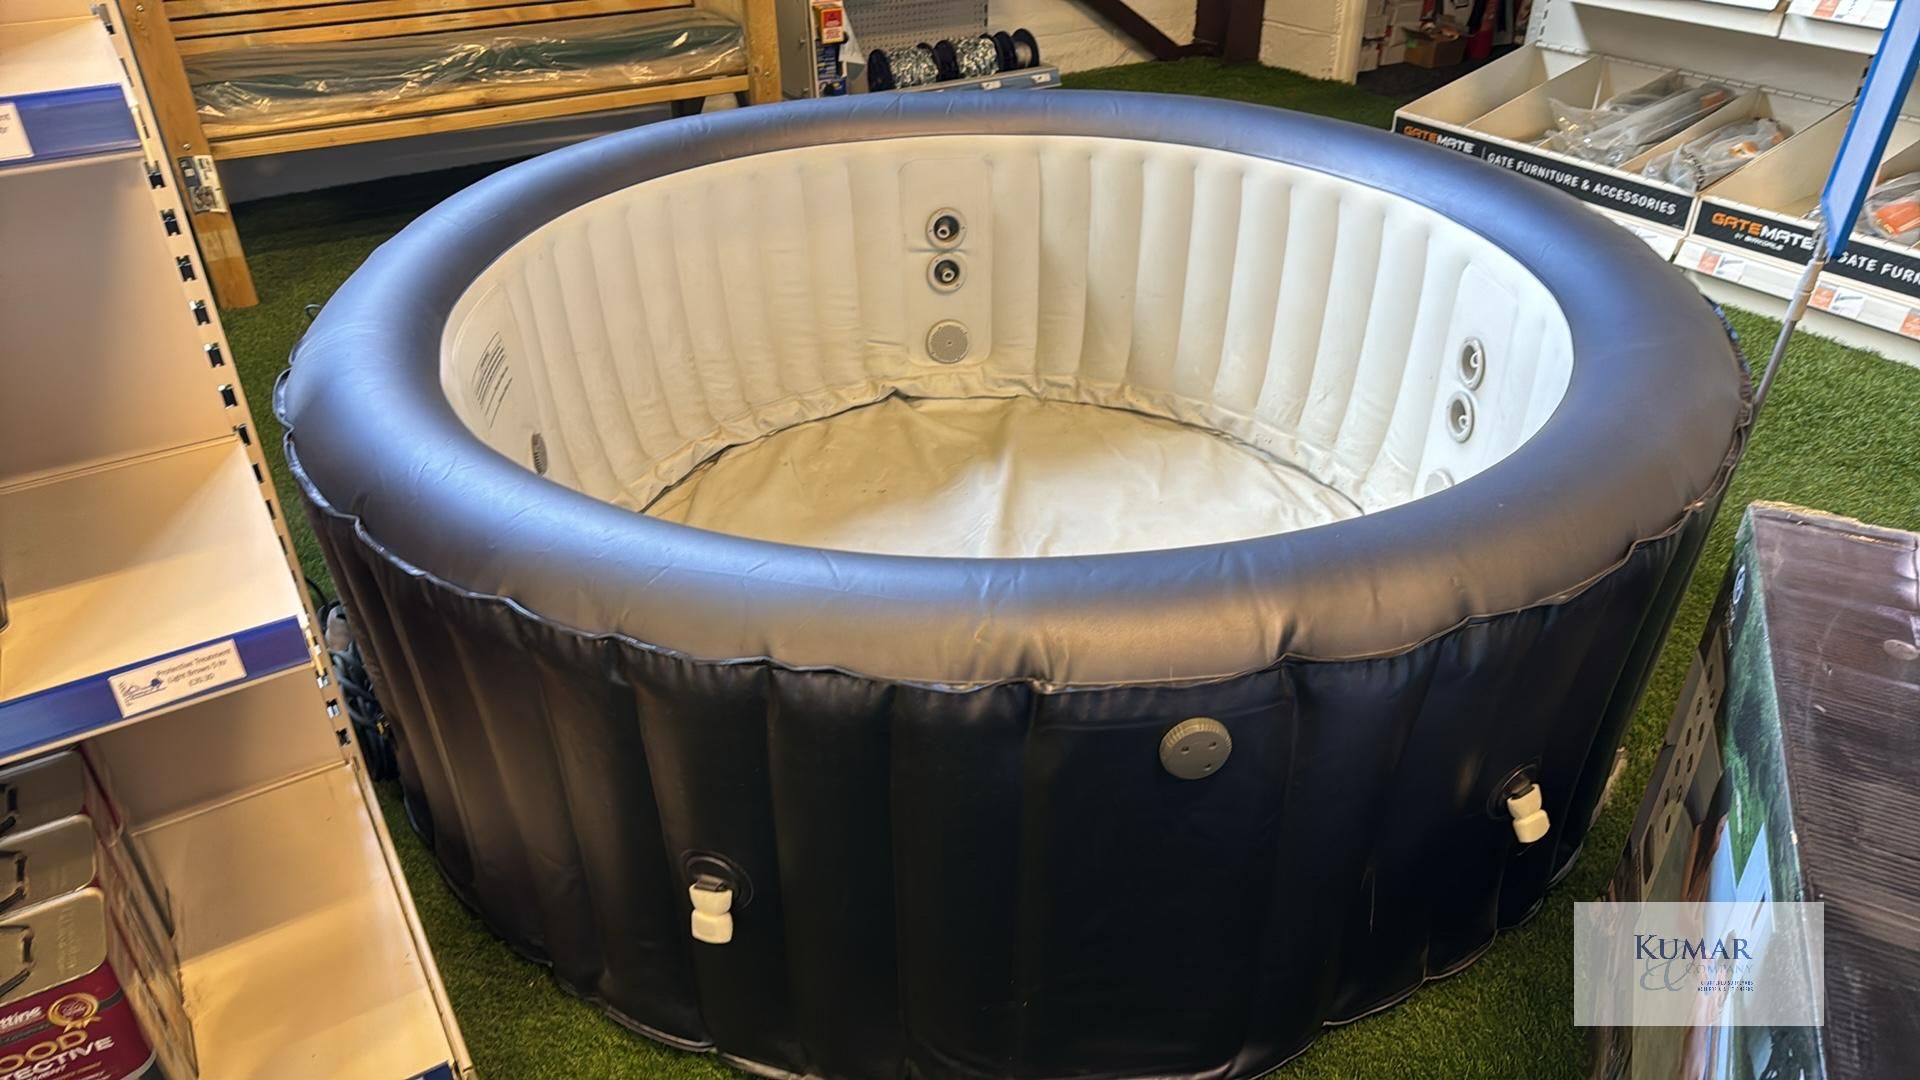 M Spa Carlton Muse Series M- CA061 6 Bather Inflatable Spa Display Model Never Been Used with Box - Image 5 of 13